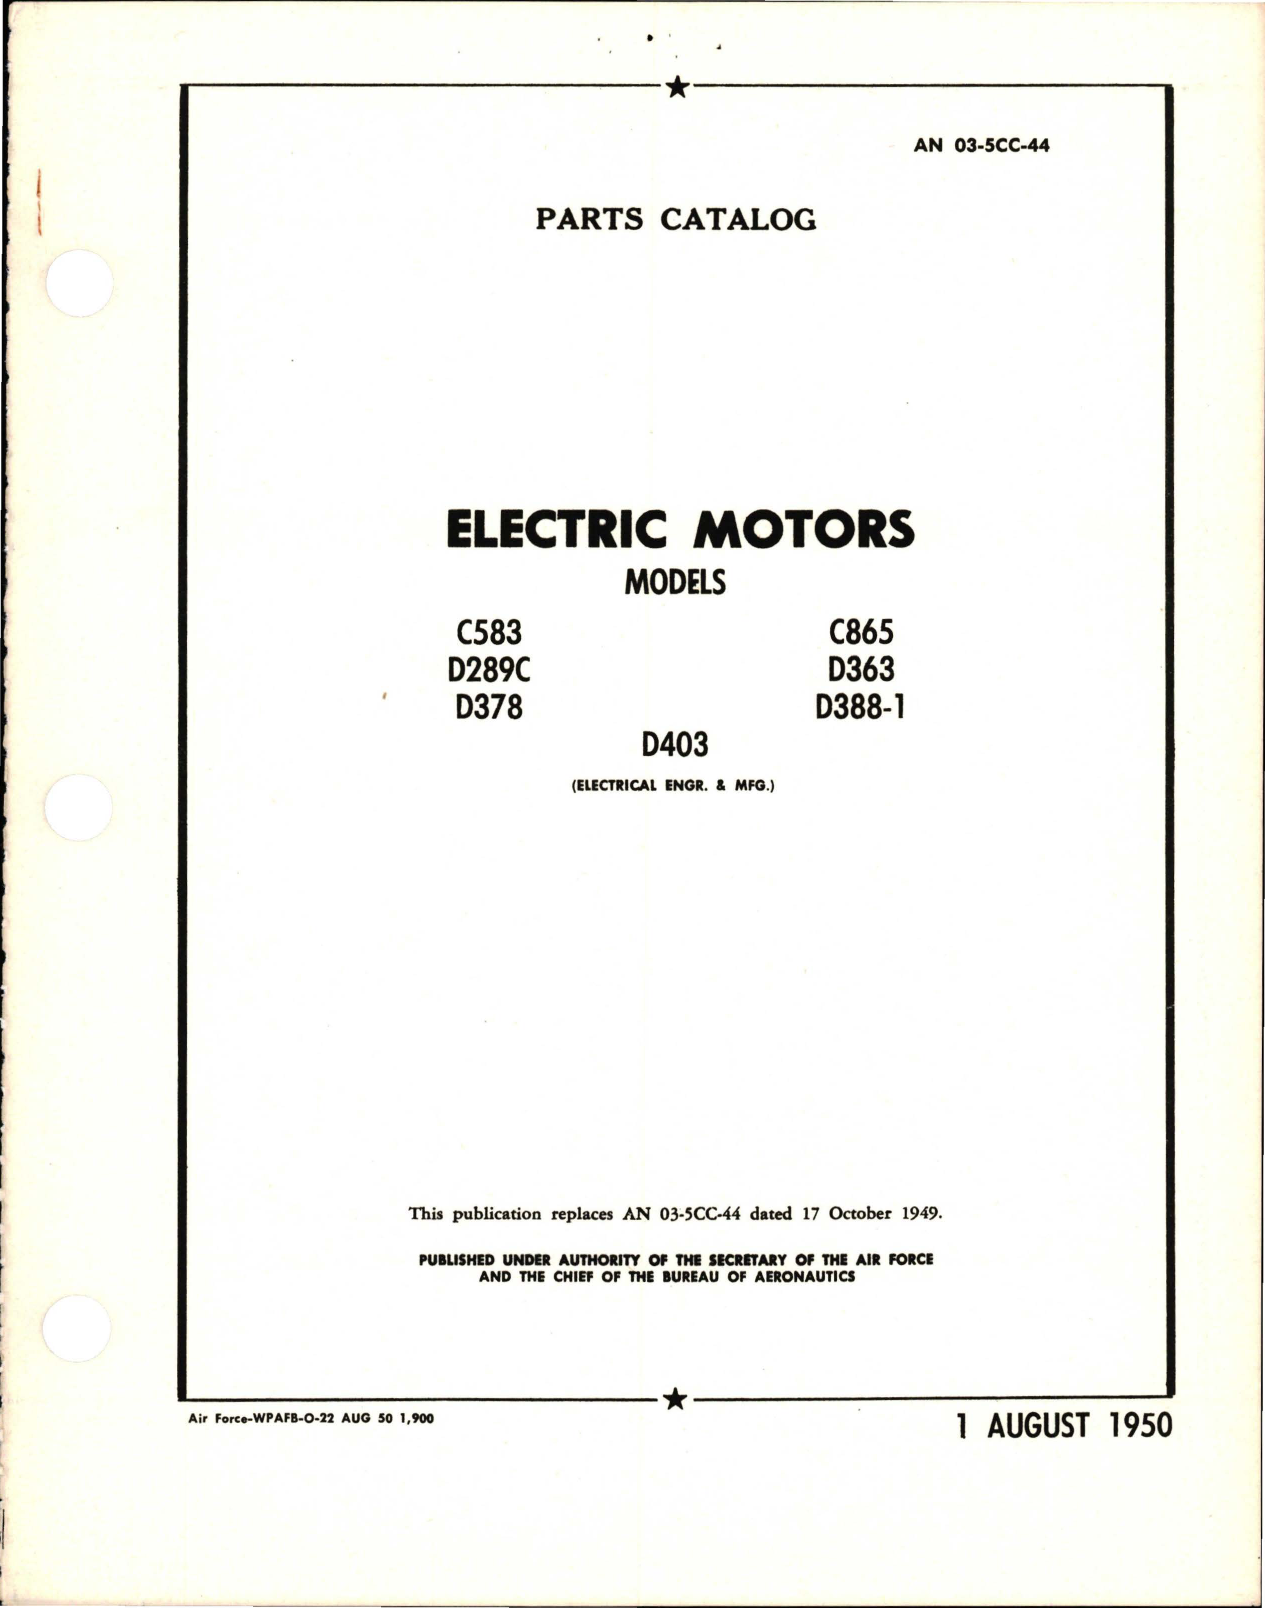 Sample page 1 from AirCorps Library document: Parts Catalog, Electric Motors - Models C583, D289C, D378, C865, D363, D388-1, and D403